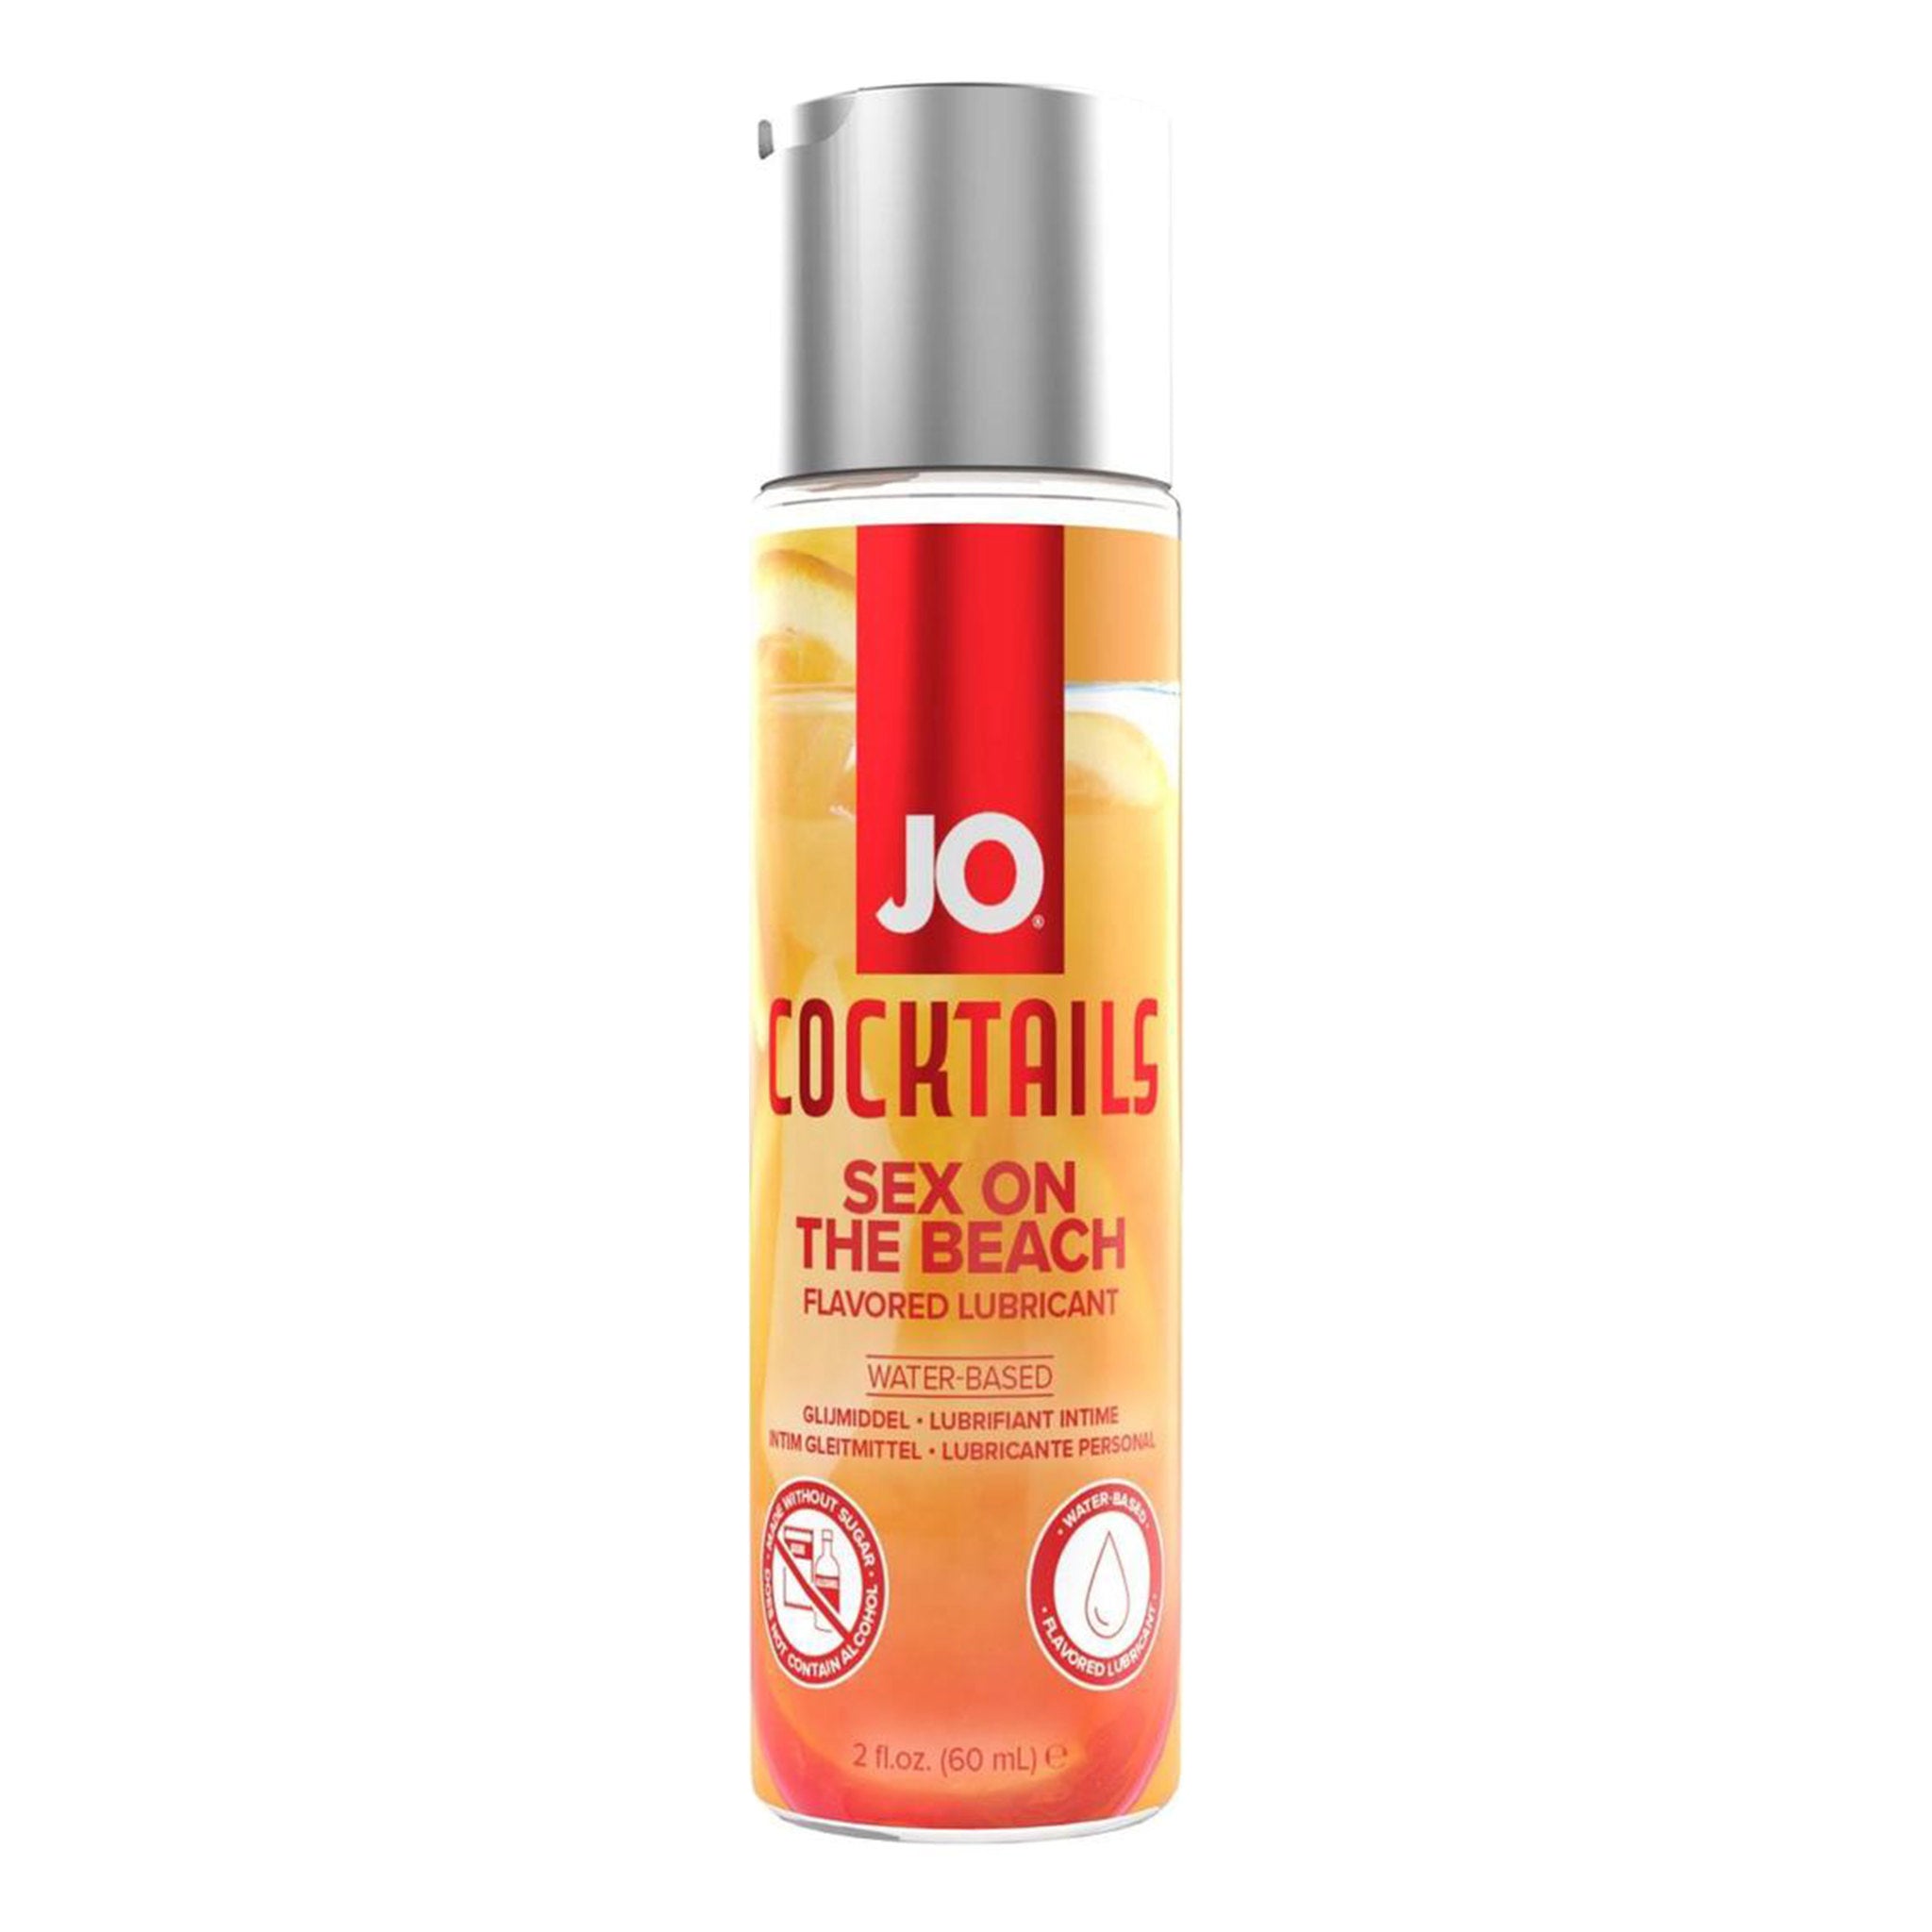 JO Cocktails Water Based Flavored Lubricant